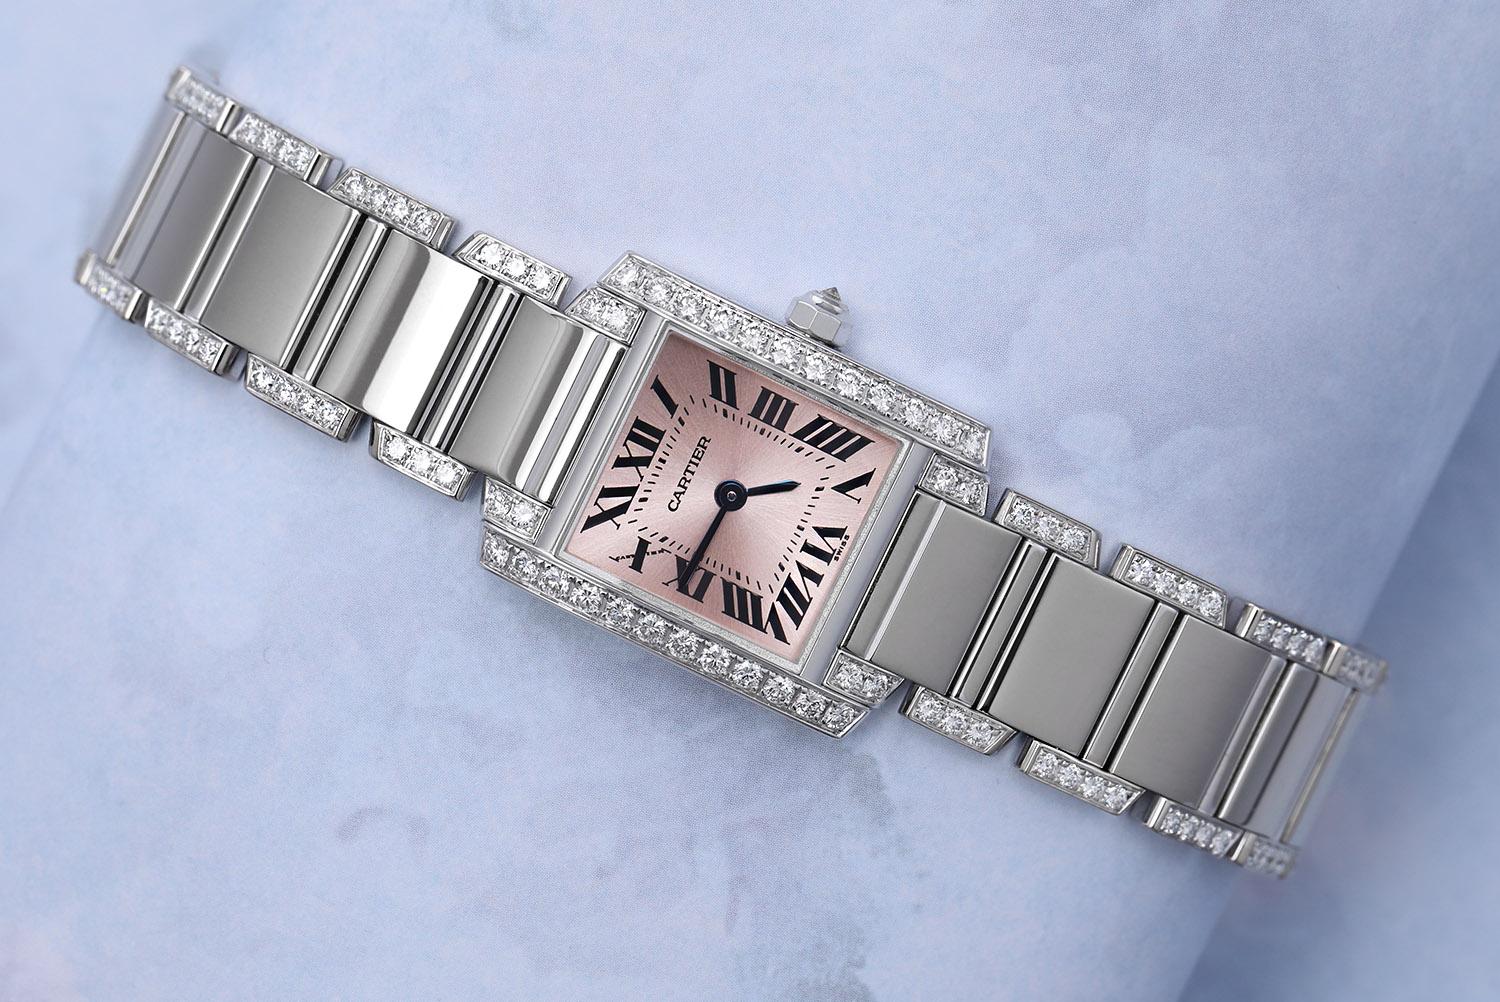 Cartier Tank Francaise Ladies 18k White Gold Watch with Factory Diamonds, Pink Dial. Watch has absolutely NO visible scratches or blemishes.